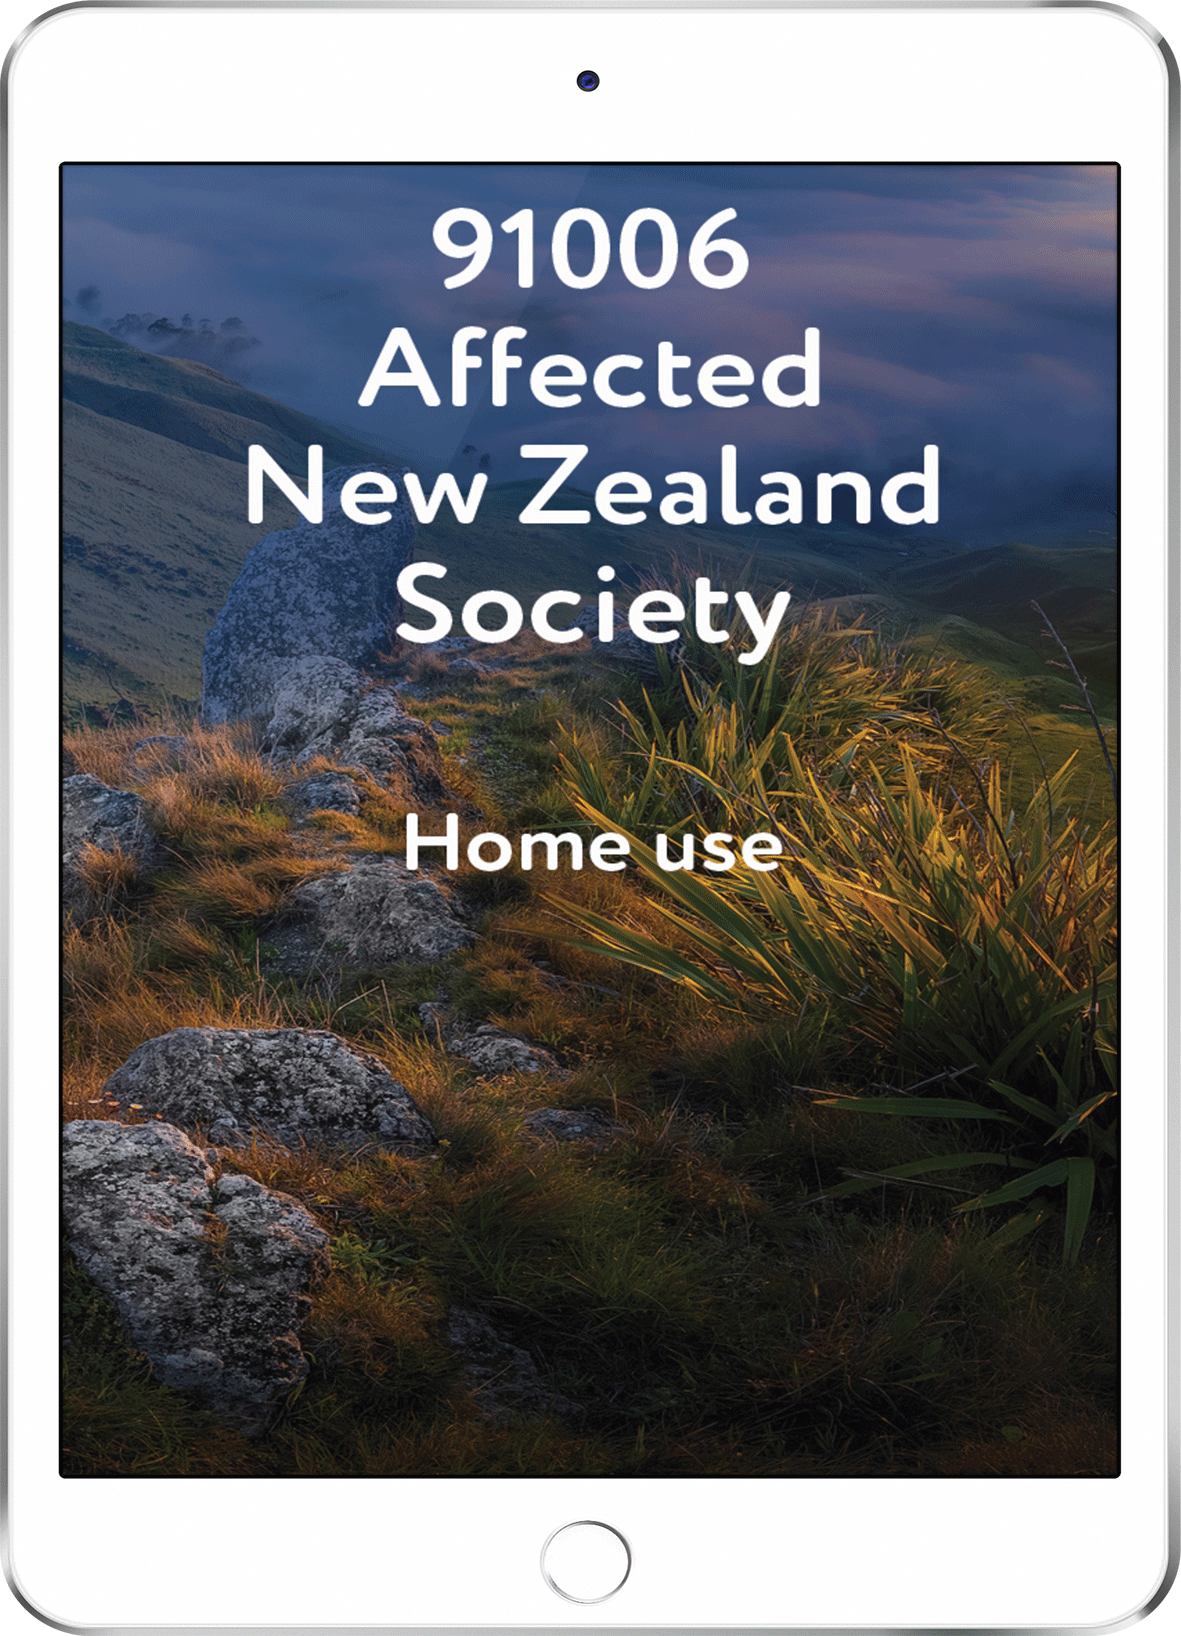 91006 Affected New Zealand Society - Home Use